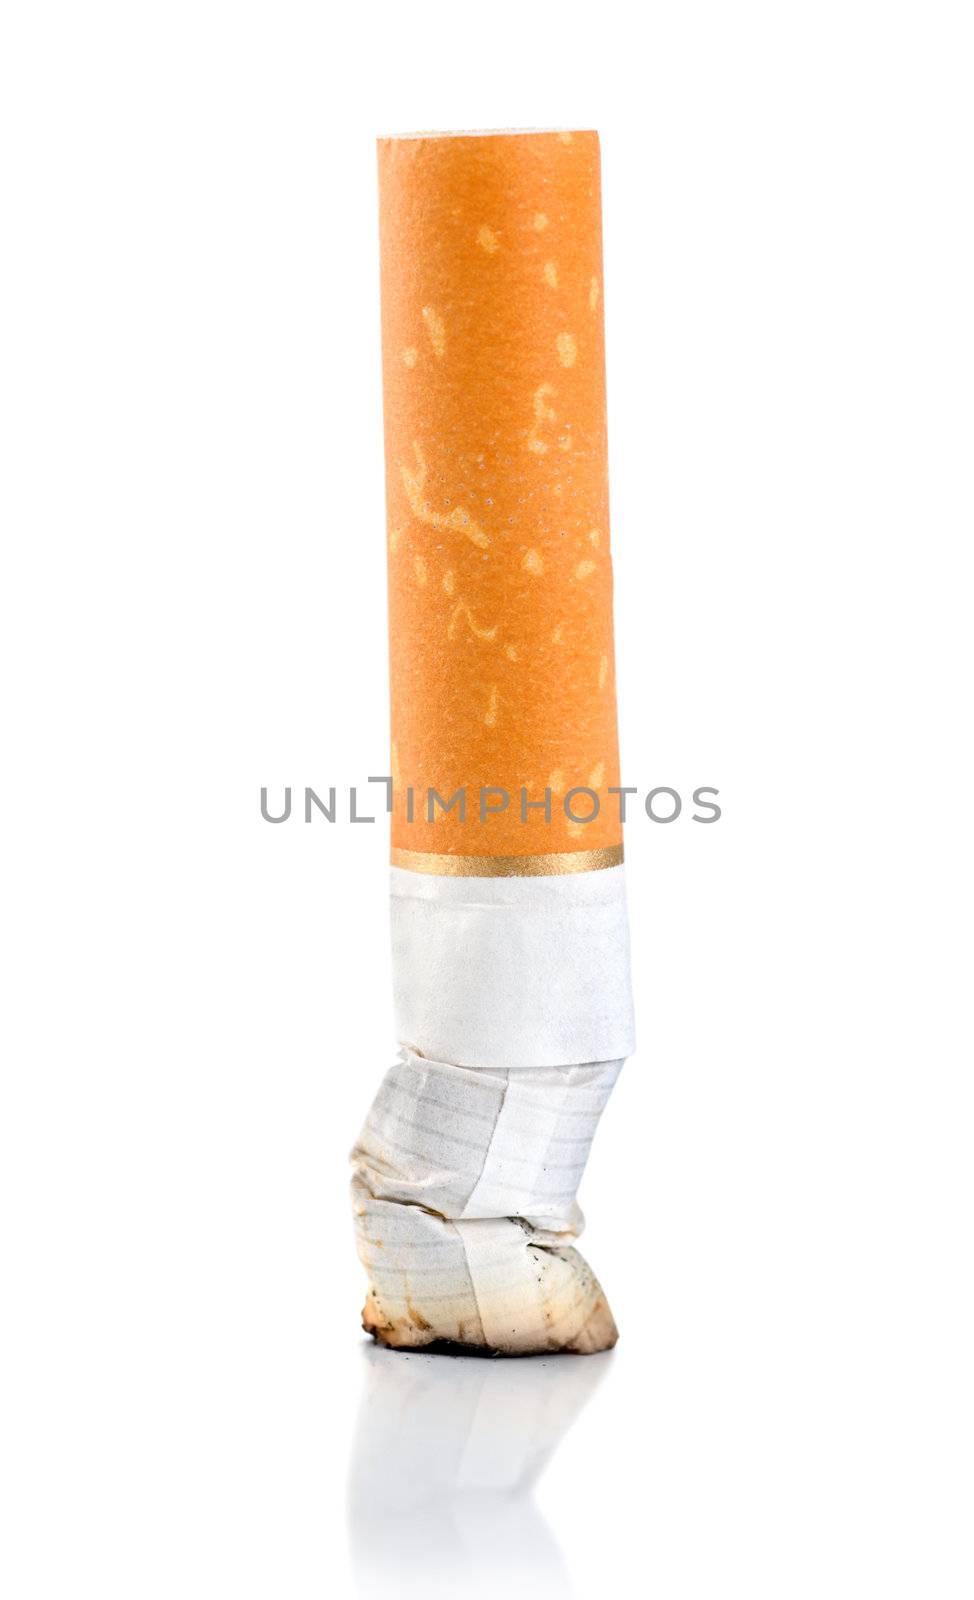 Cigarette butt isolated on a white background (Clipping Path)